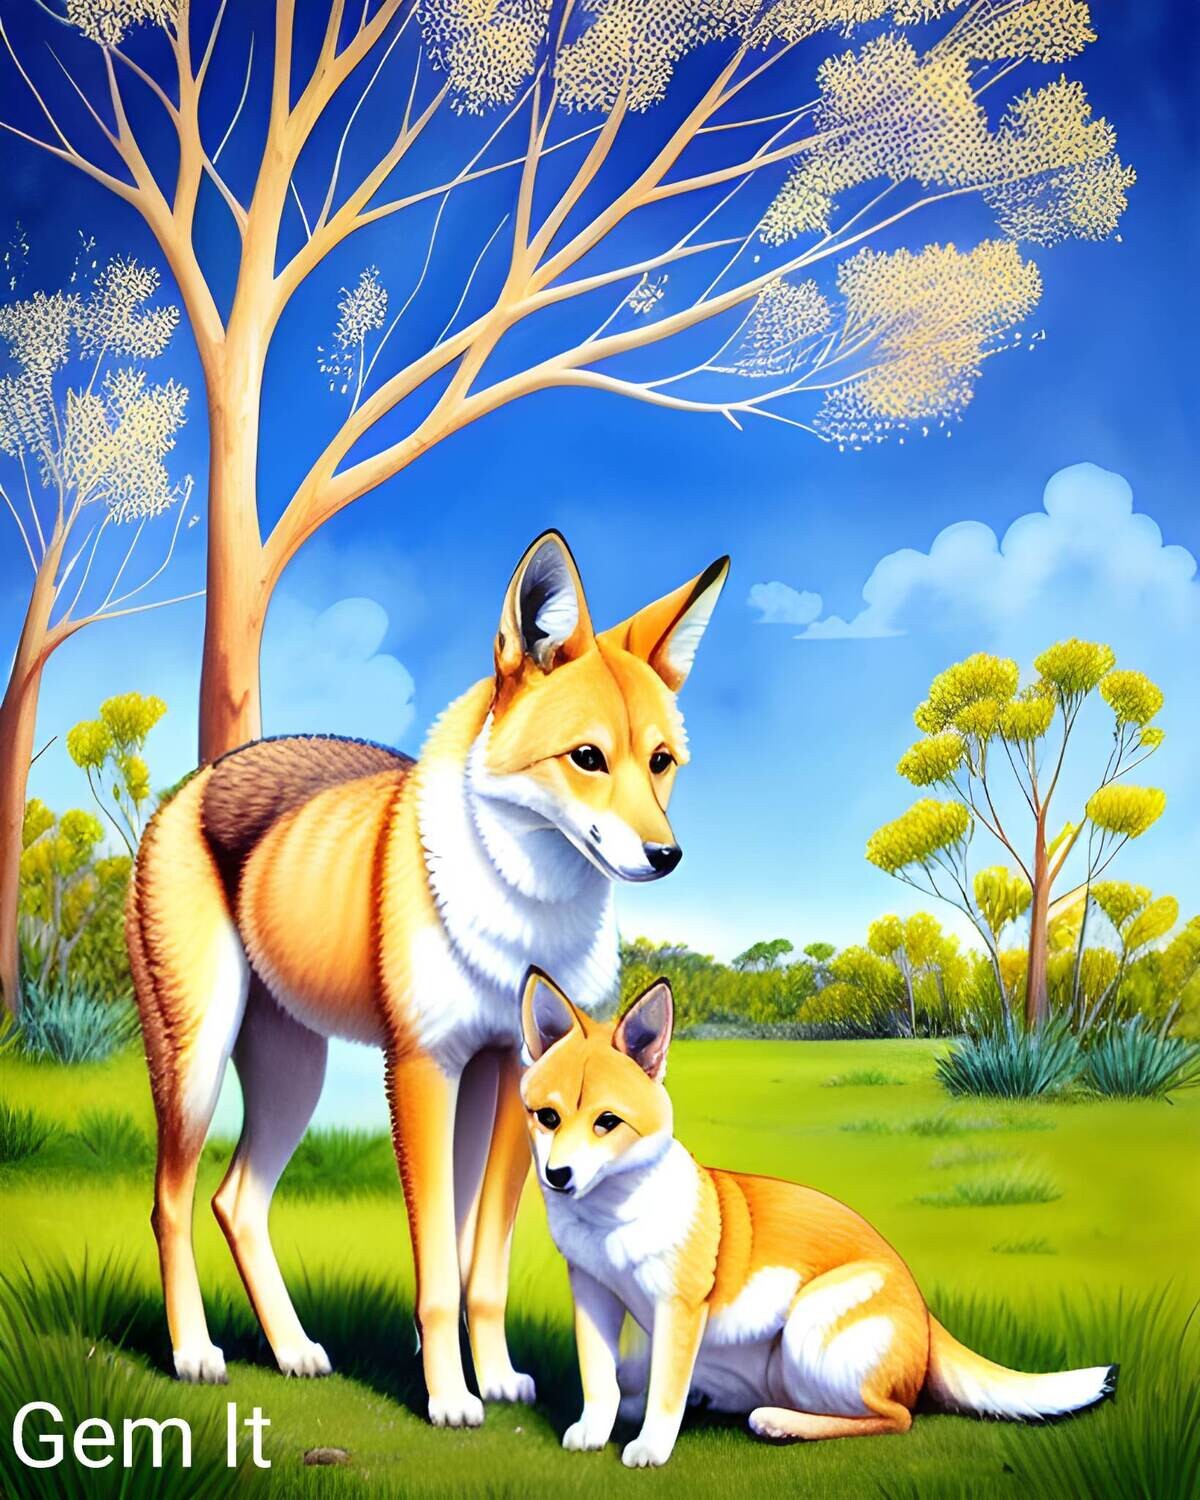 Dingoes - Specially ordered for you. Delivery is approximately 4 - 6 weeks.